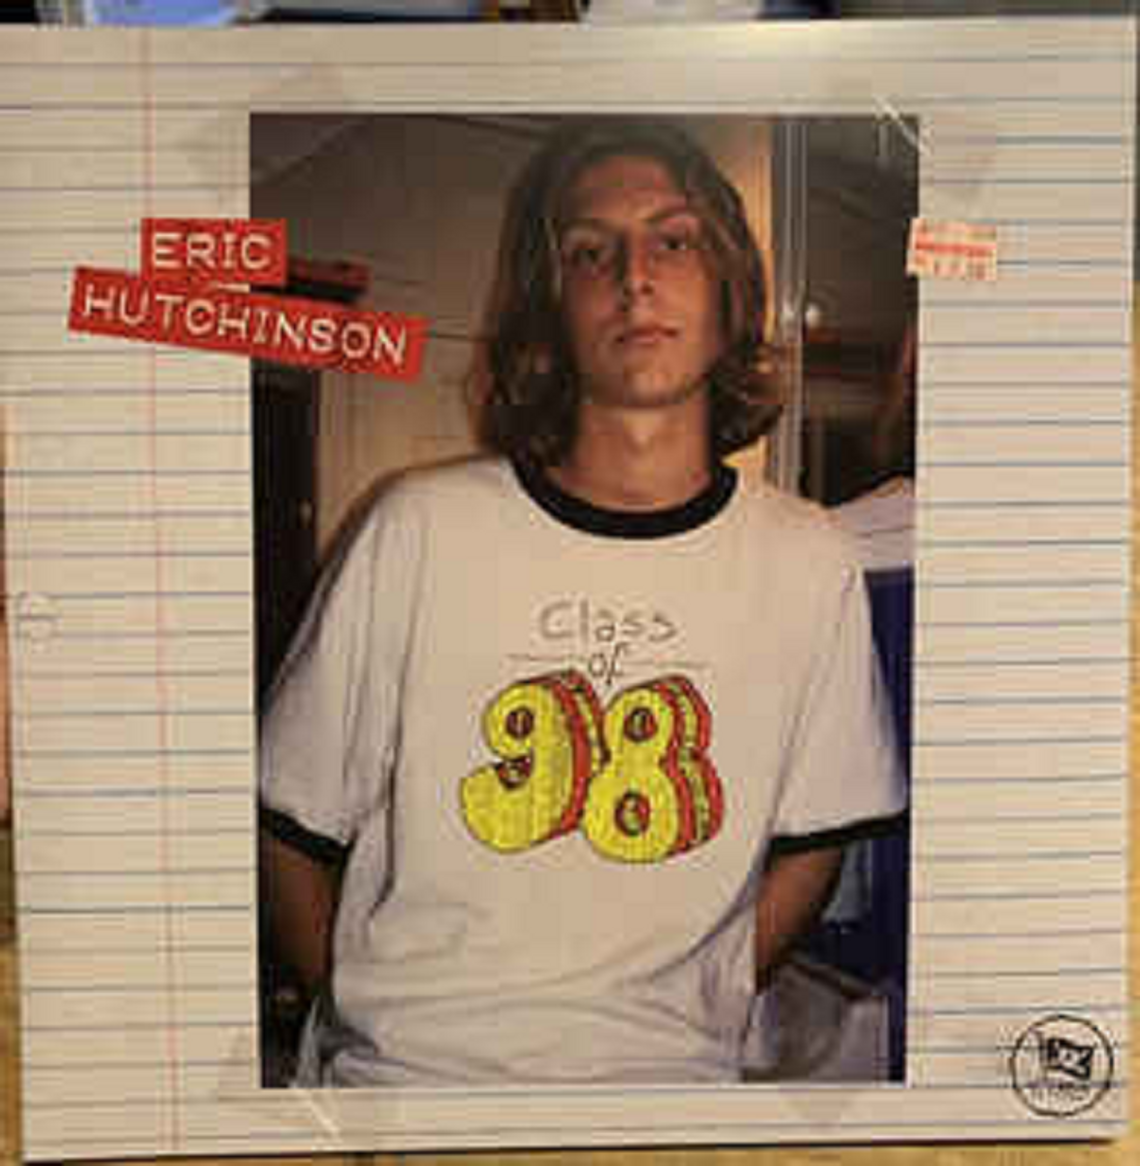 Album Review – Class of 98 by Eric Hutchinson